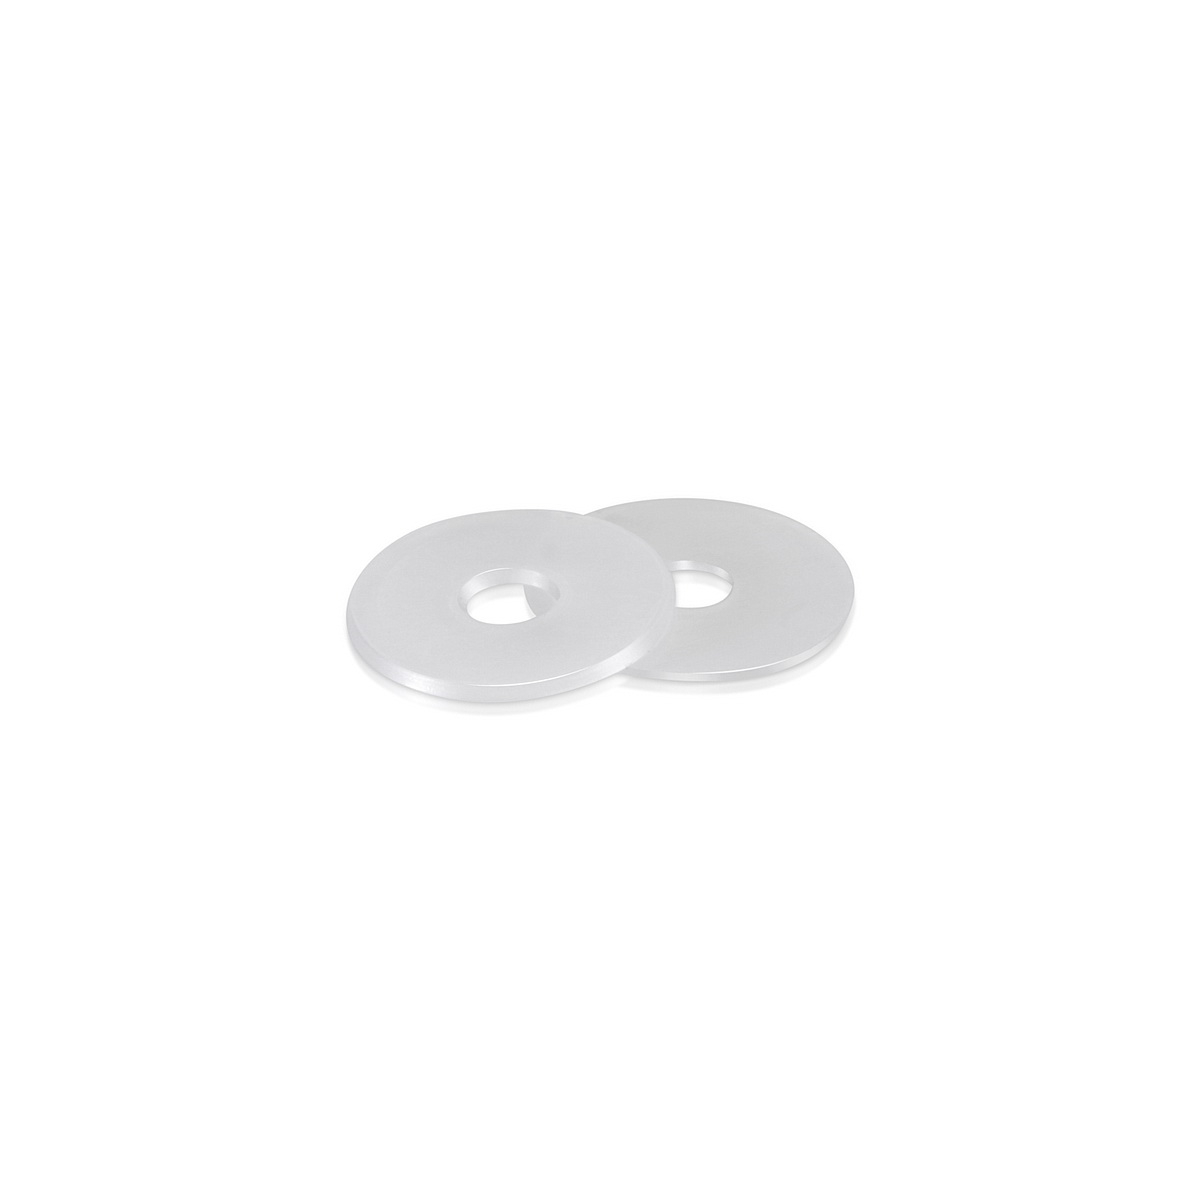 Nylon Washer, 1'' OD x 1/4'' ID x 0.02'' Thick. (For 1/4-20 Stud)